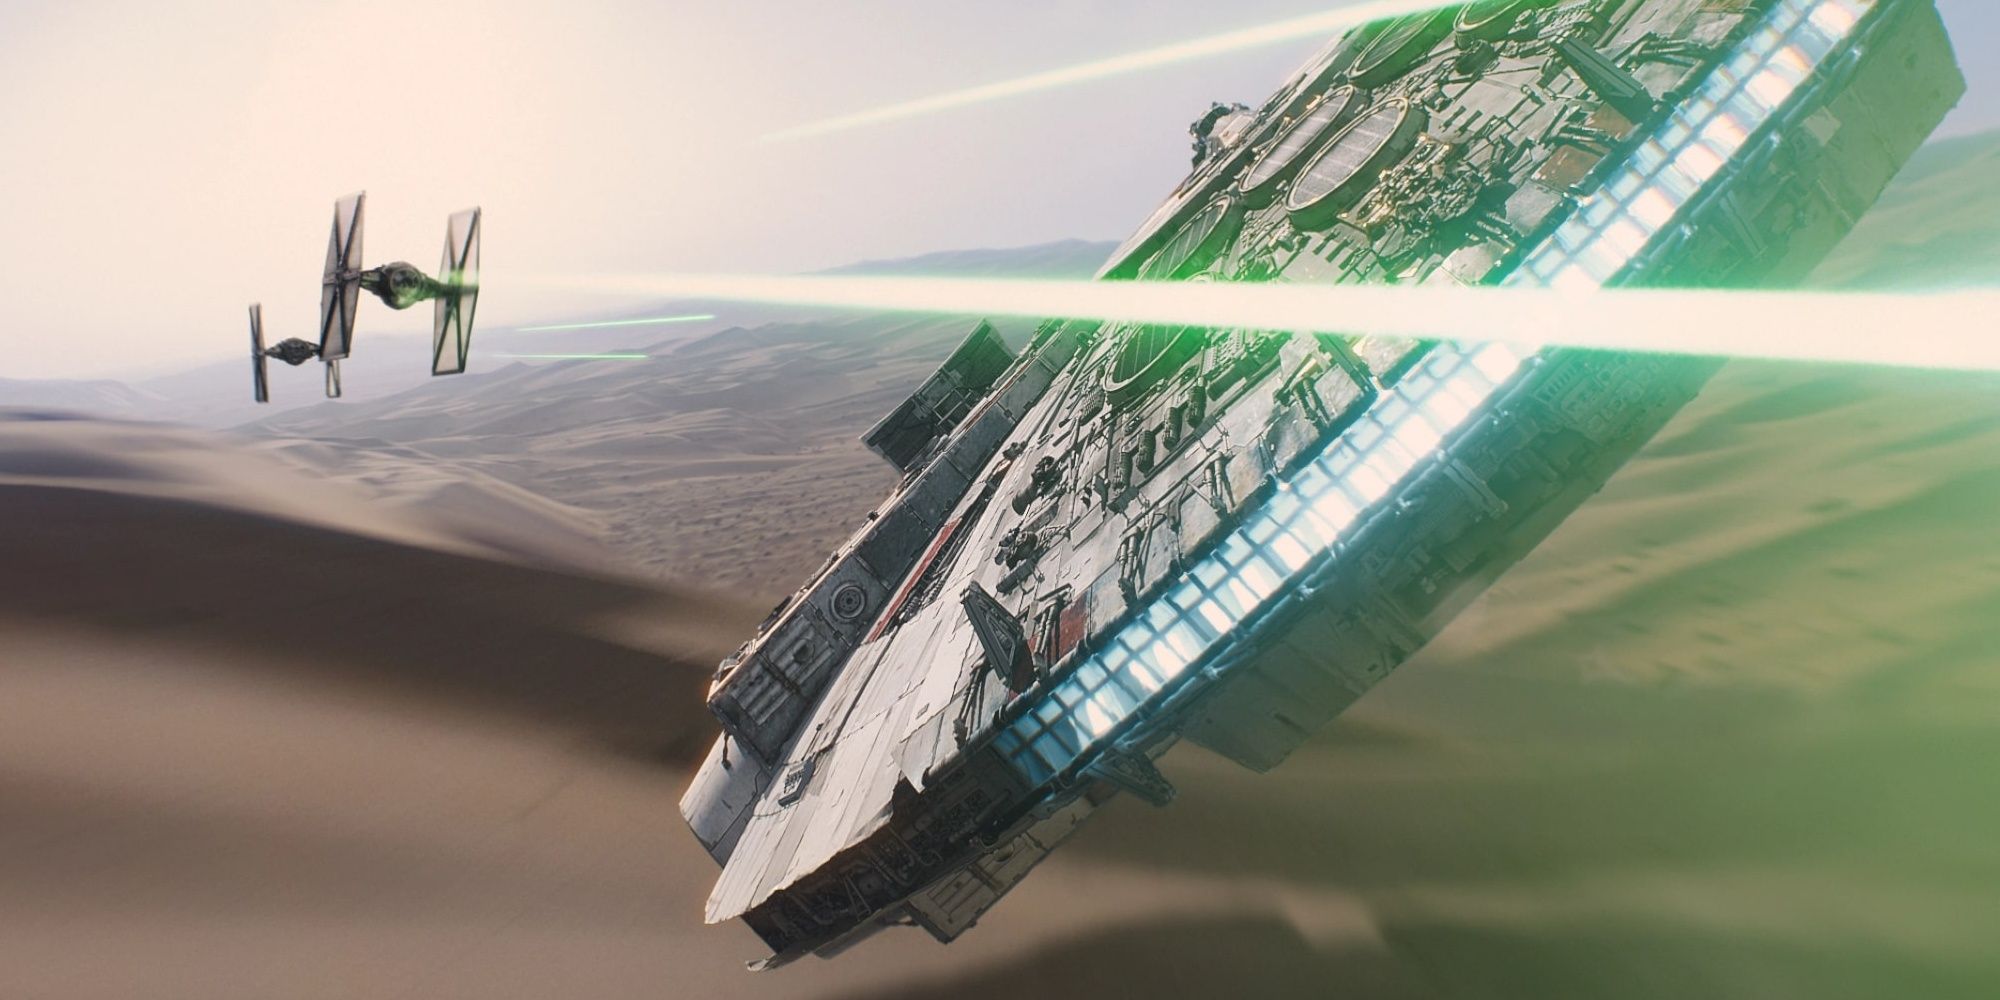 The Millenium Falcon in a dogfight in the desert in Star Wars: The Force Awakens